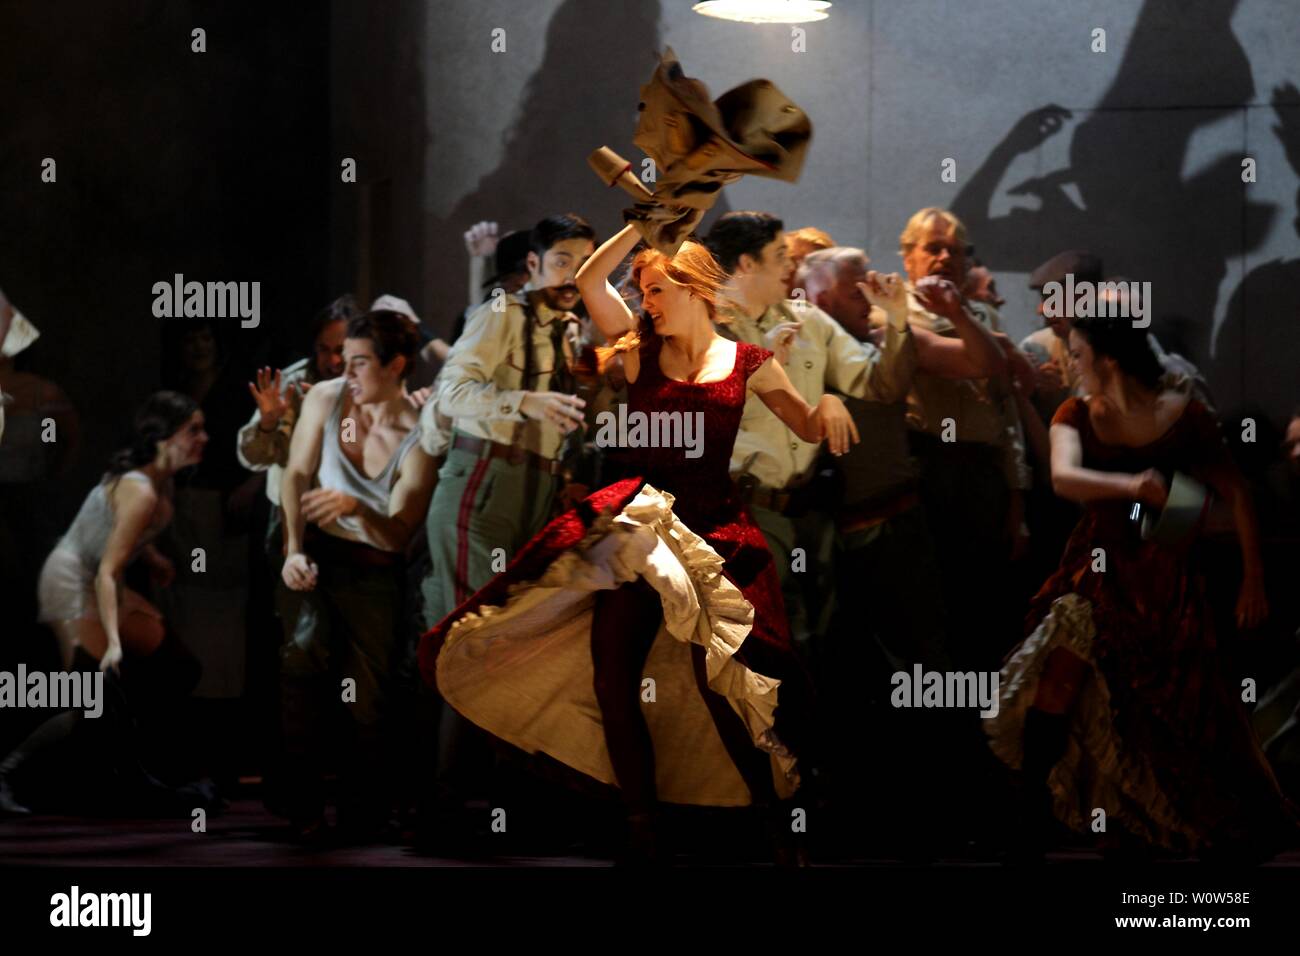 On Friday, 30 November 2018, the curtain will rise on the premiere of Georges Bizet’s Carmen in a production of Lindy Hume. She partners once again with Dan Potra, who will design both the set and the costumes. Matthias Foremny musically directs the Gewandhaus Orchestra. Wallis Giunta, a member of the ensemble and a prize winner at the International Opera Awards 2018, gives her debut as Carmen. Olena Tokar and Sandra Maxheimer also debut their roles as Micaëla und Mercédès, respectively. Leonardo Caimi sings Don José. And Gezim Myshketa takes on the role of the bullfighter Escamillo. Stock Photo